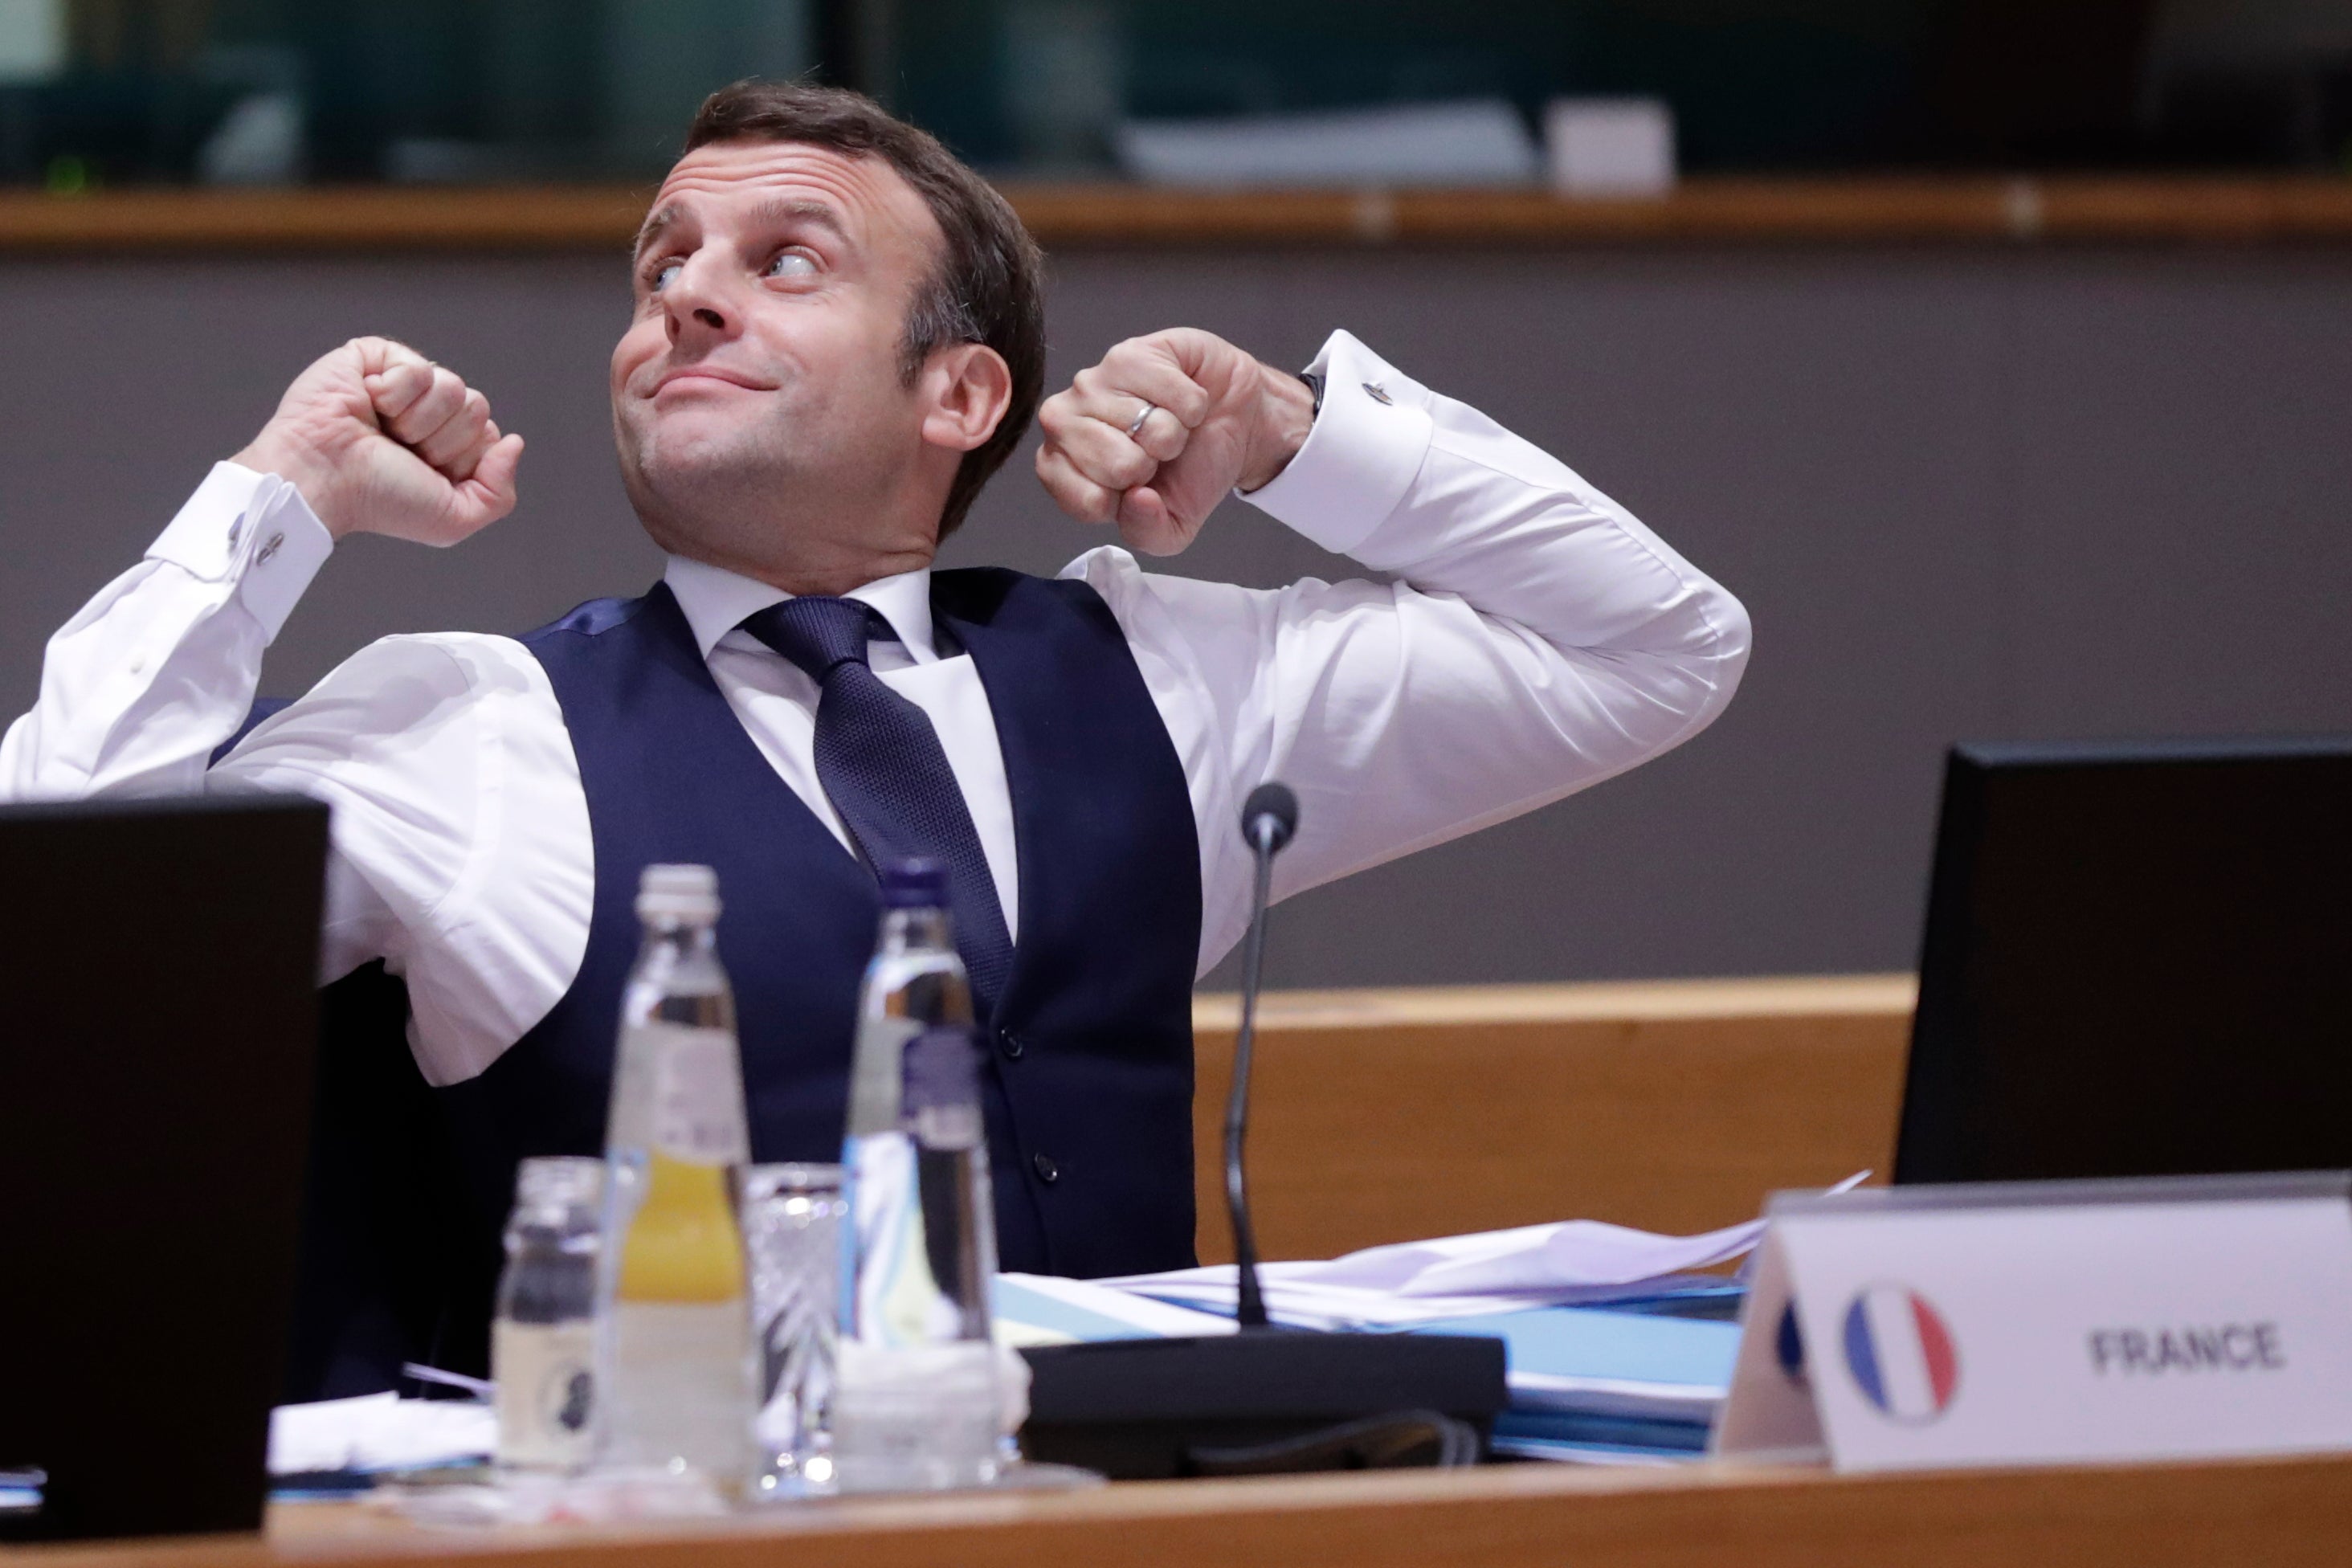 France’s President Emmanuel Macron stretches after a night of negociation during a round table meeting in the EU summit